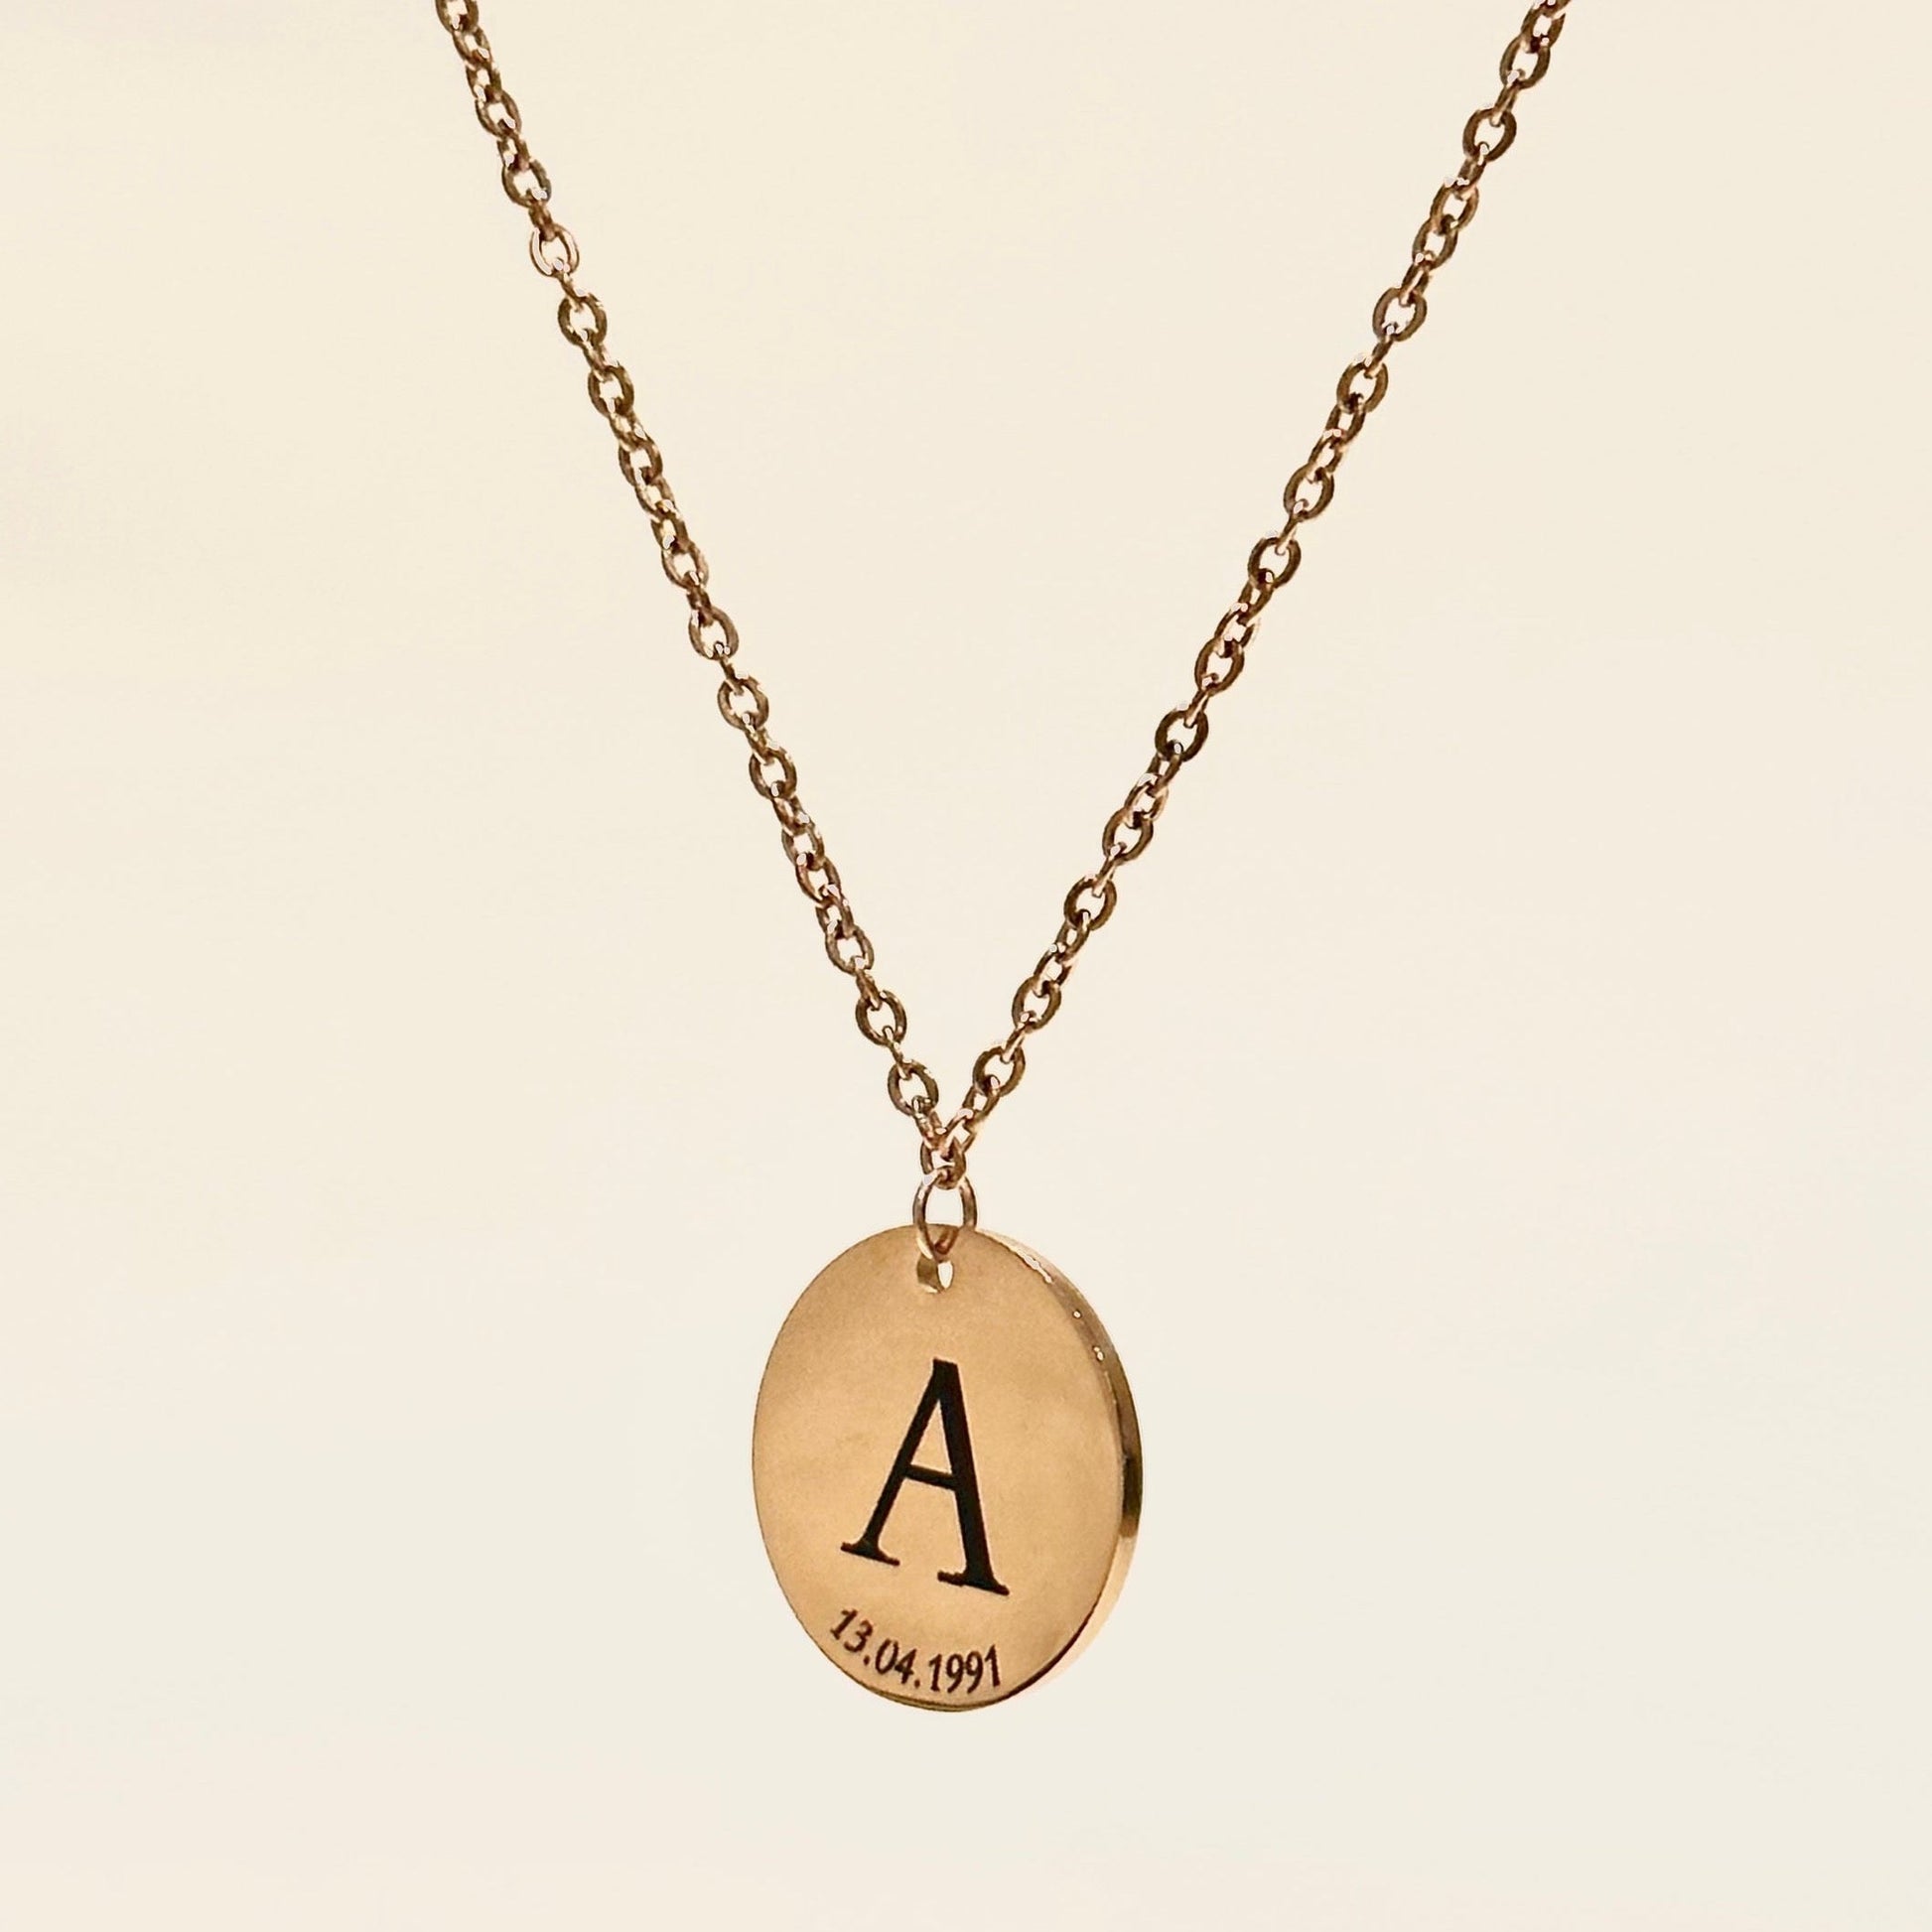 Get trendy with Galway Necklace - Engraved disk - Disk Necklace available at Alma Ireland. Grab yours for €24.99 today!